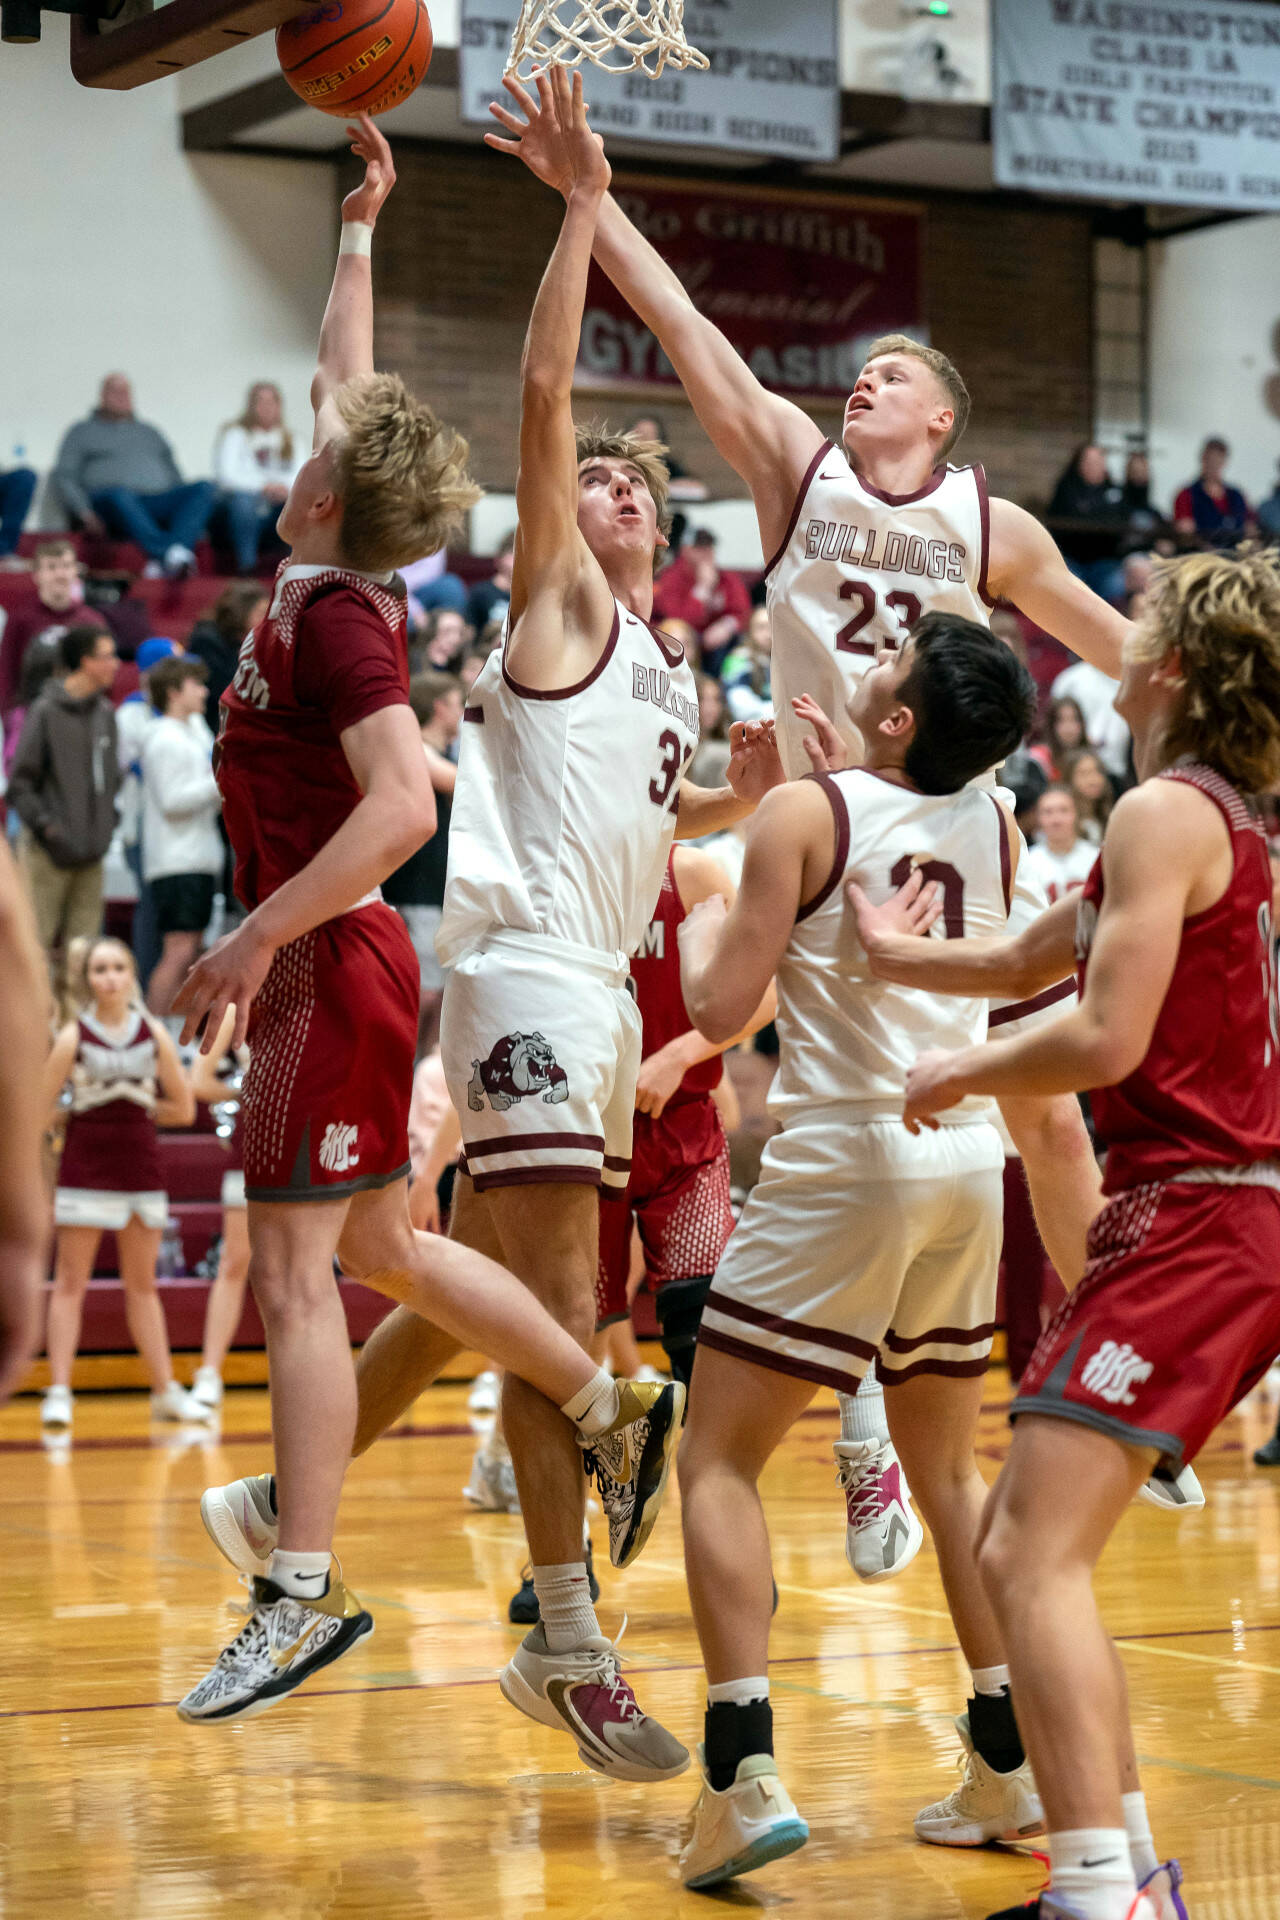 PHOTO BY FOREST WORGUM Montesano’s Tyce Peterson (23) and Soren Cobb defend against Hoquiam’s Michael Lorton Watkins, left, during the Grizzlies’ 54-28 win on Thursday in Montesano.